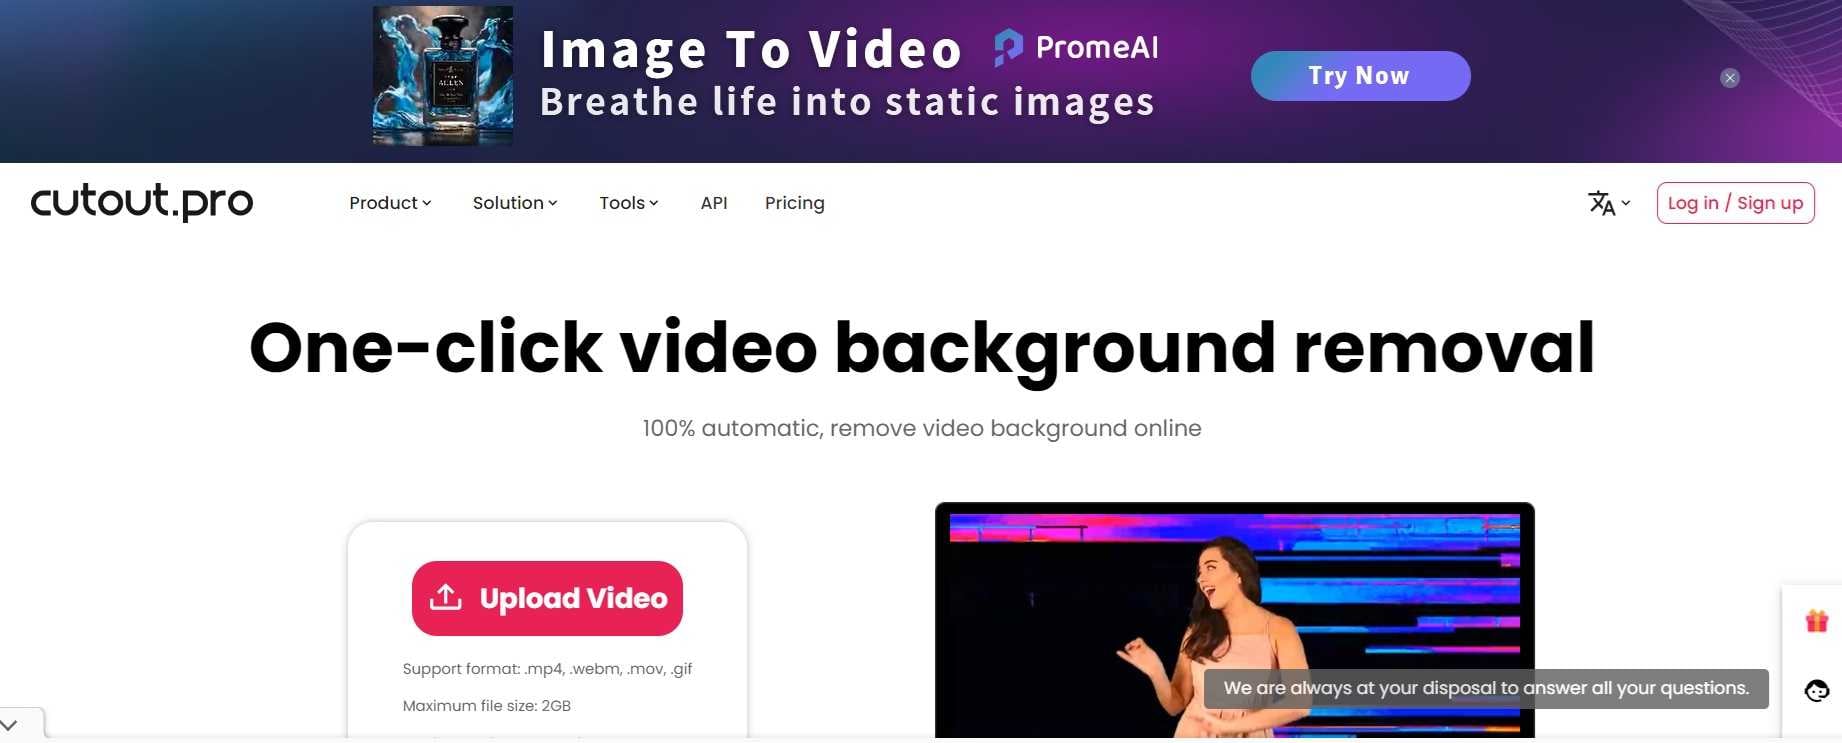 change background video online free cutout 